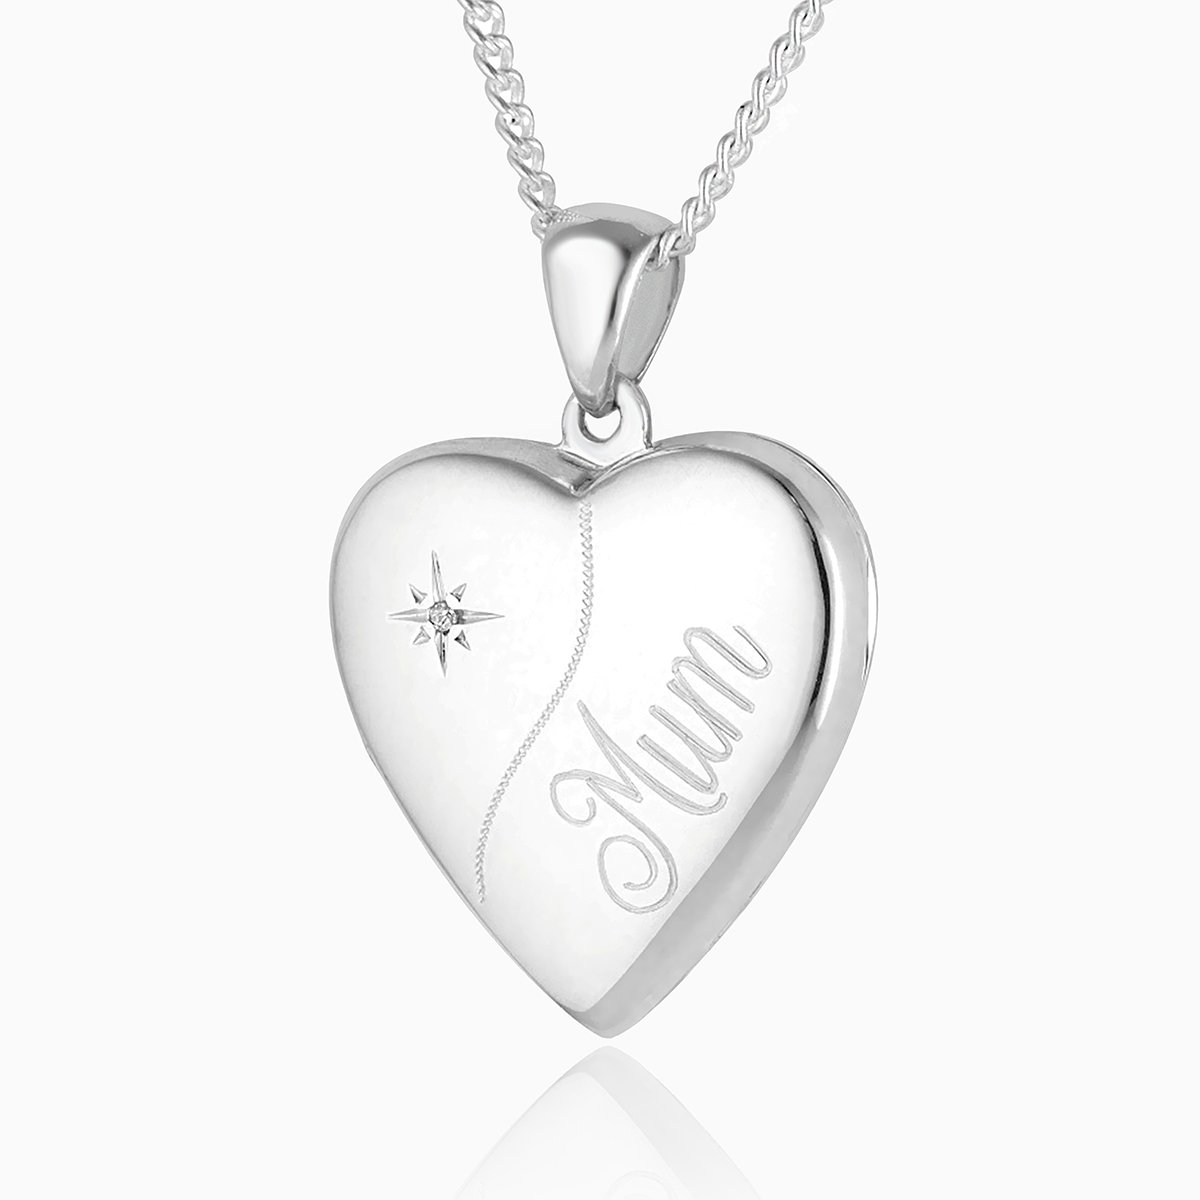 Personalised Necklace For Mum From £12.99 – Nimixu Prints